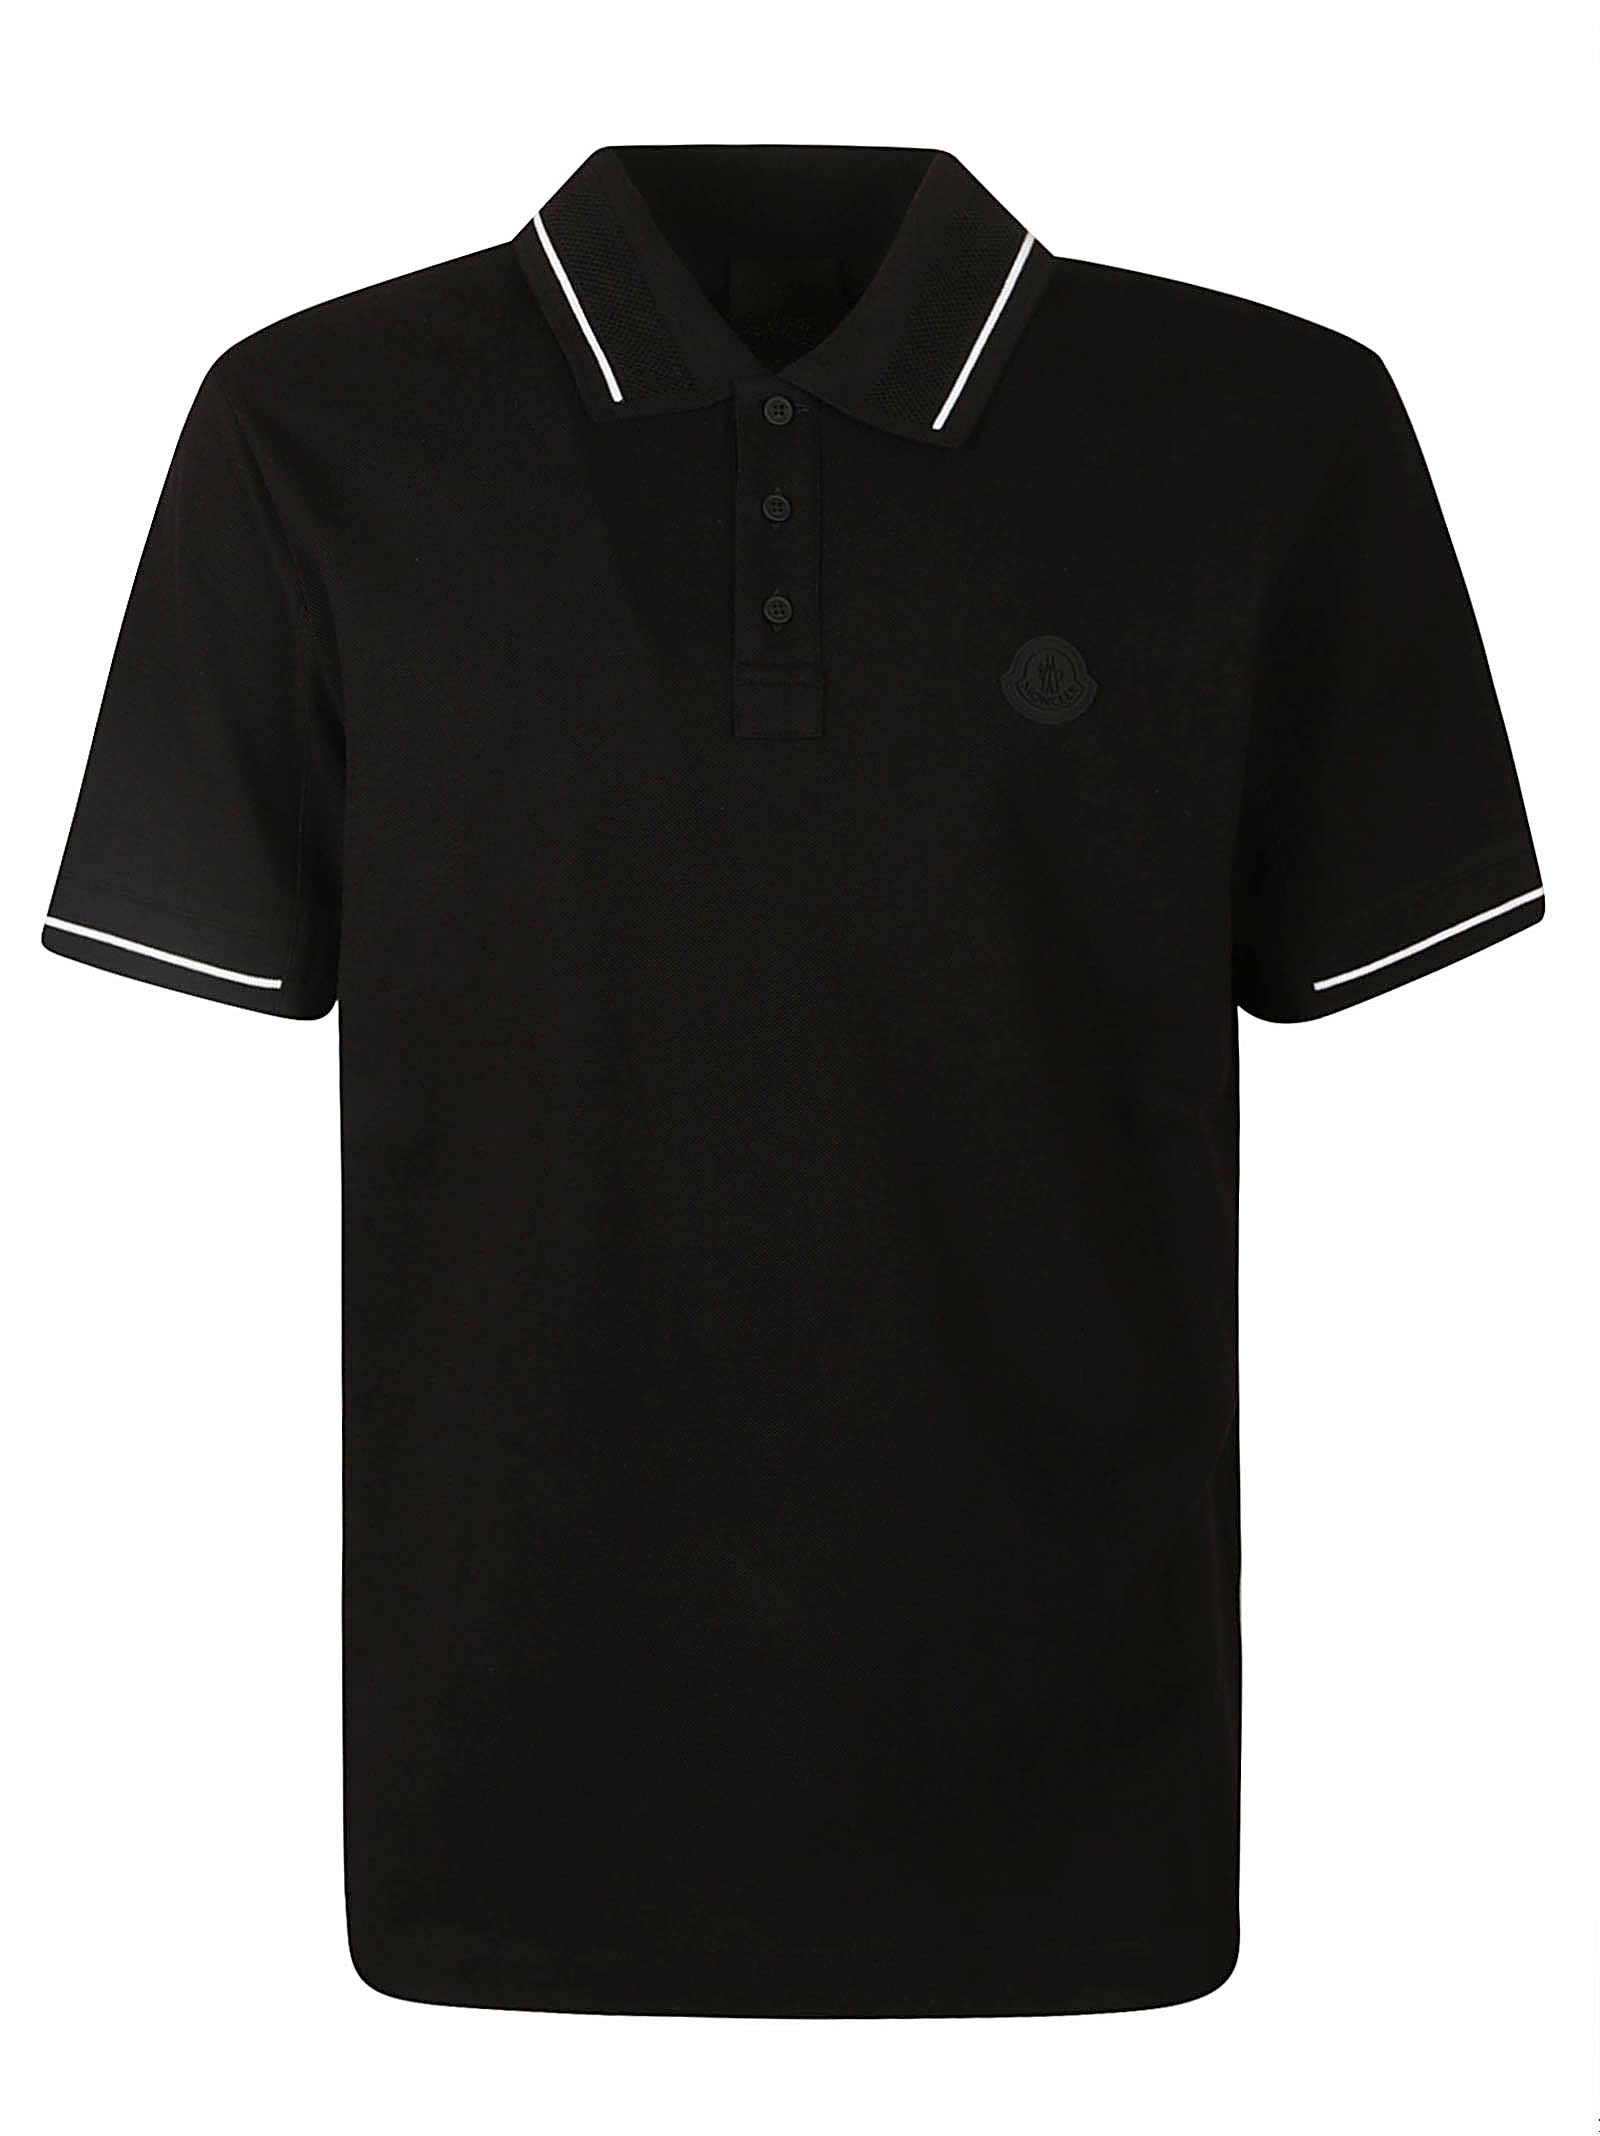 MONCLER LOGO PATCHED POLO SHIRT